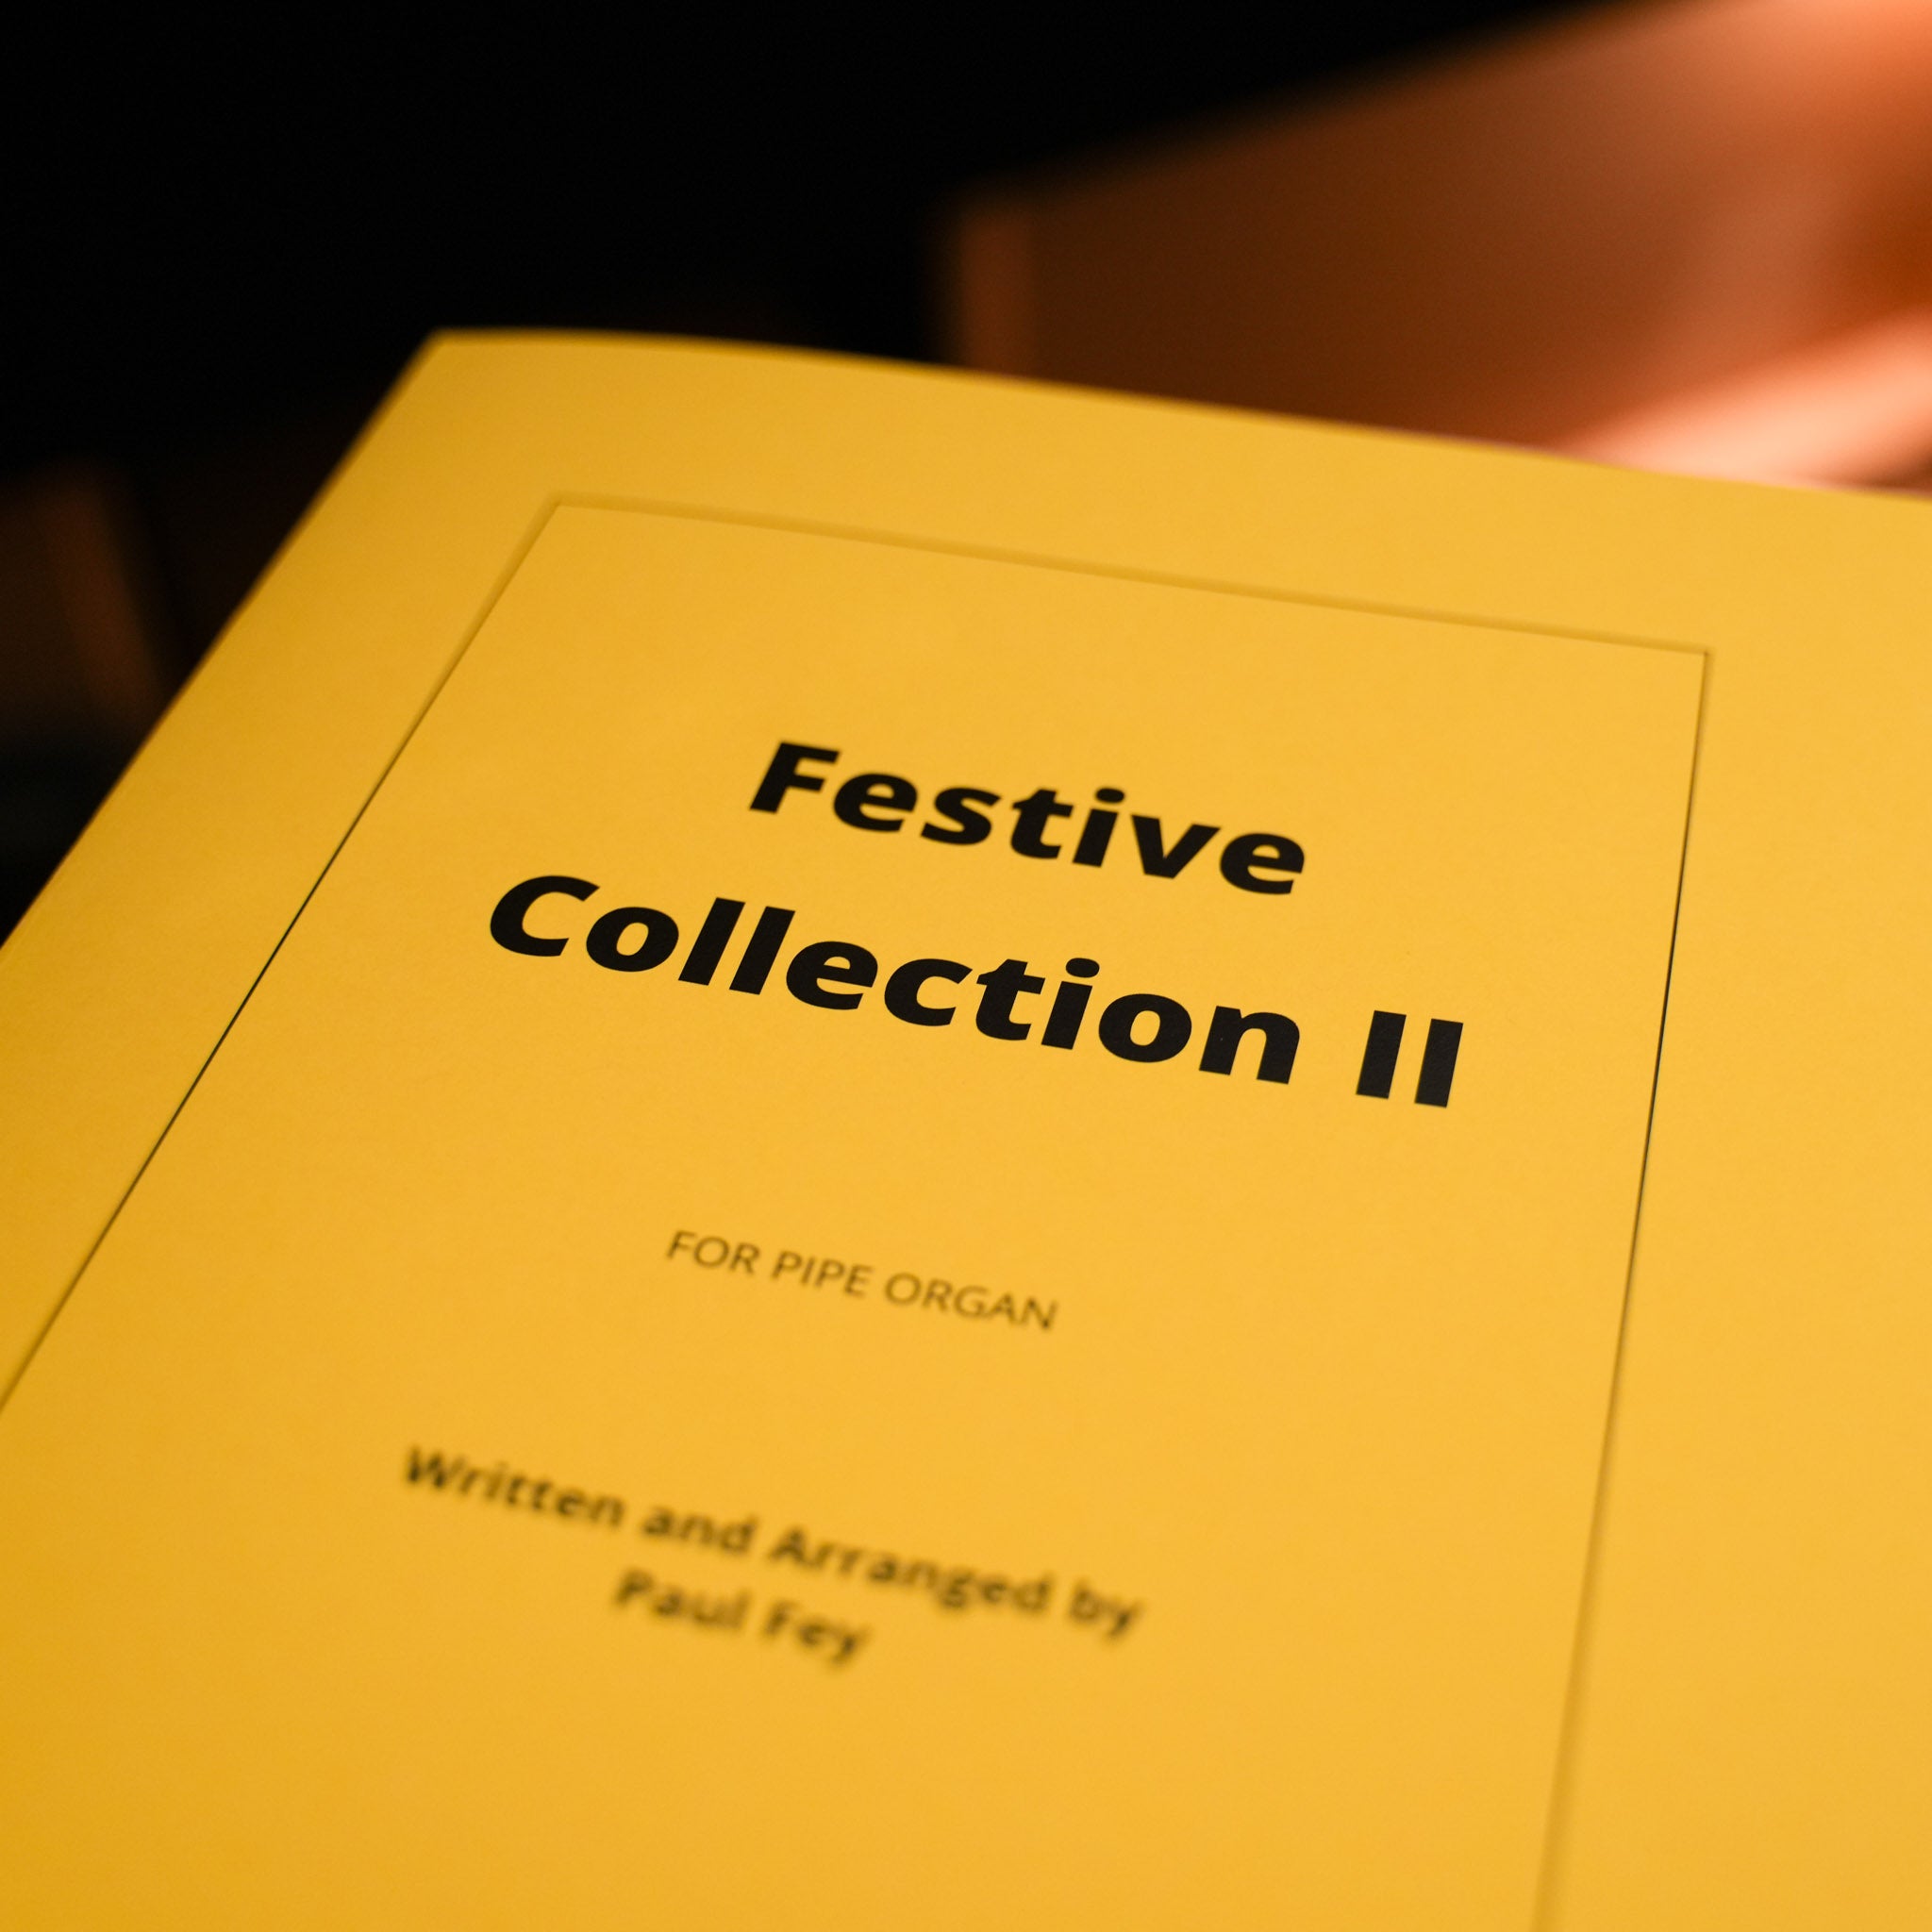 Festive Collection II - 10 Pieces for Pipe Organ (Sheet Music)